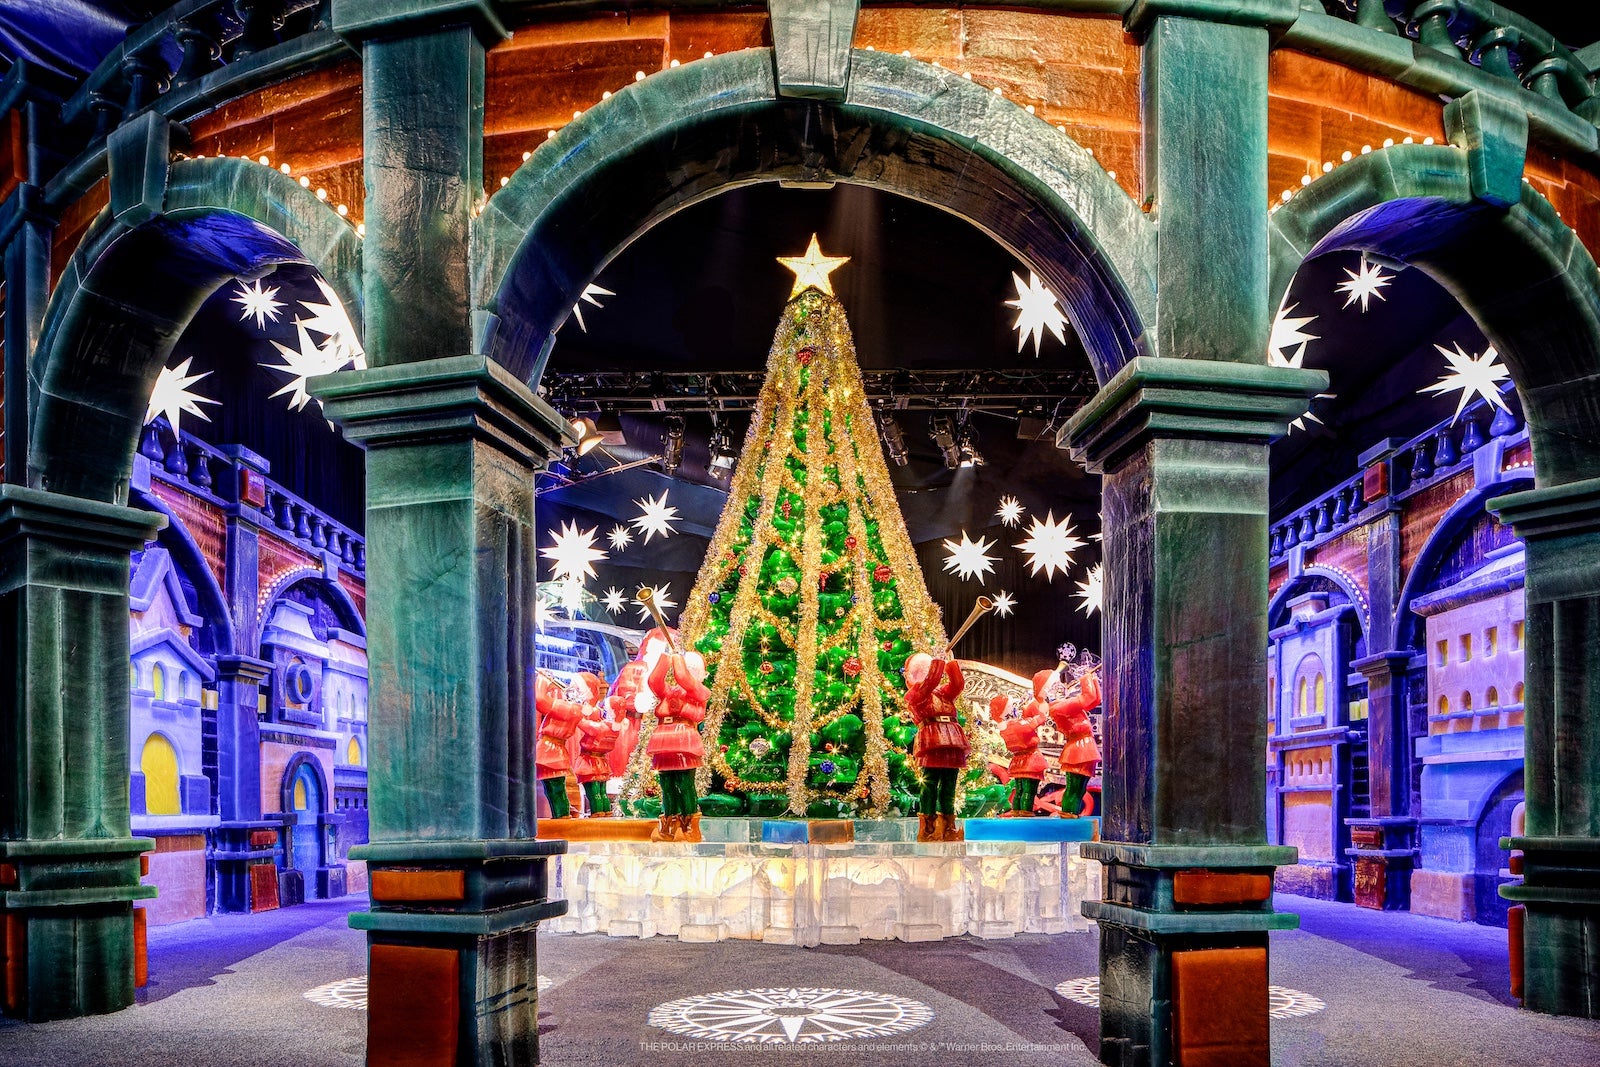 Ho-ho-holiday fun: Tickets on sale now for Ice! at Gaylord Hotels